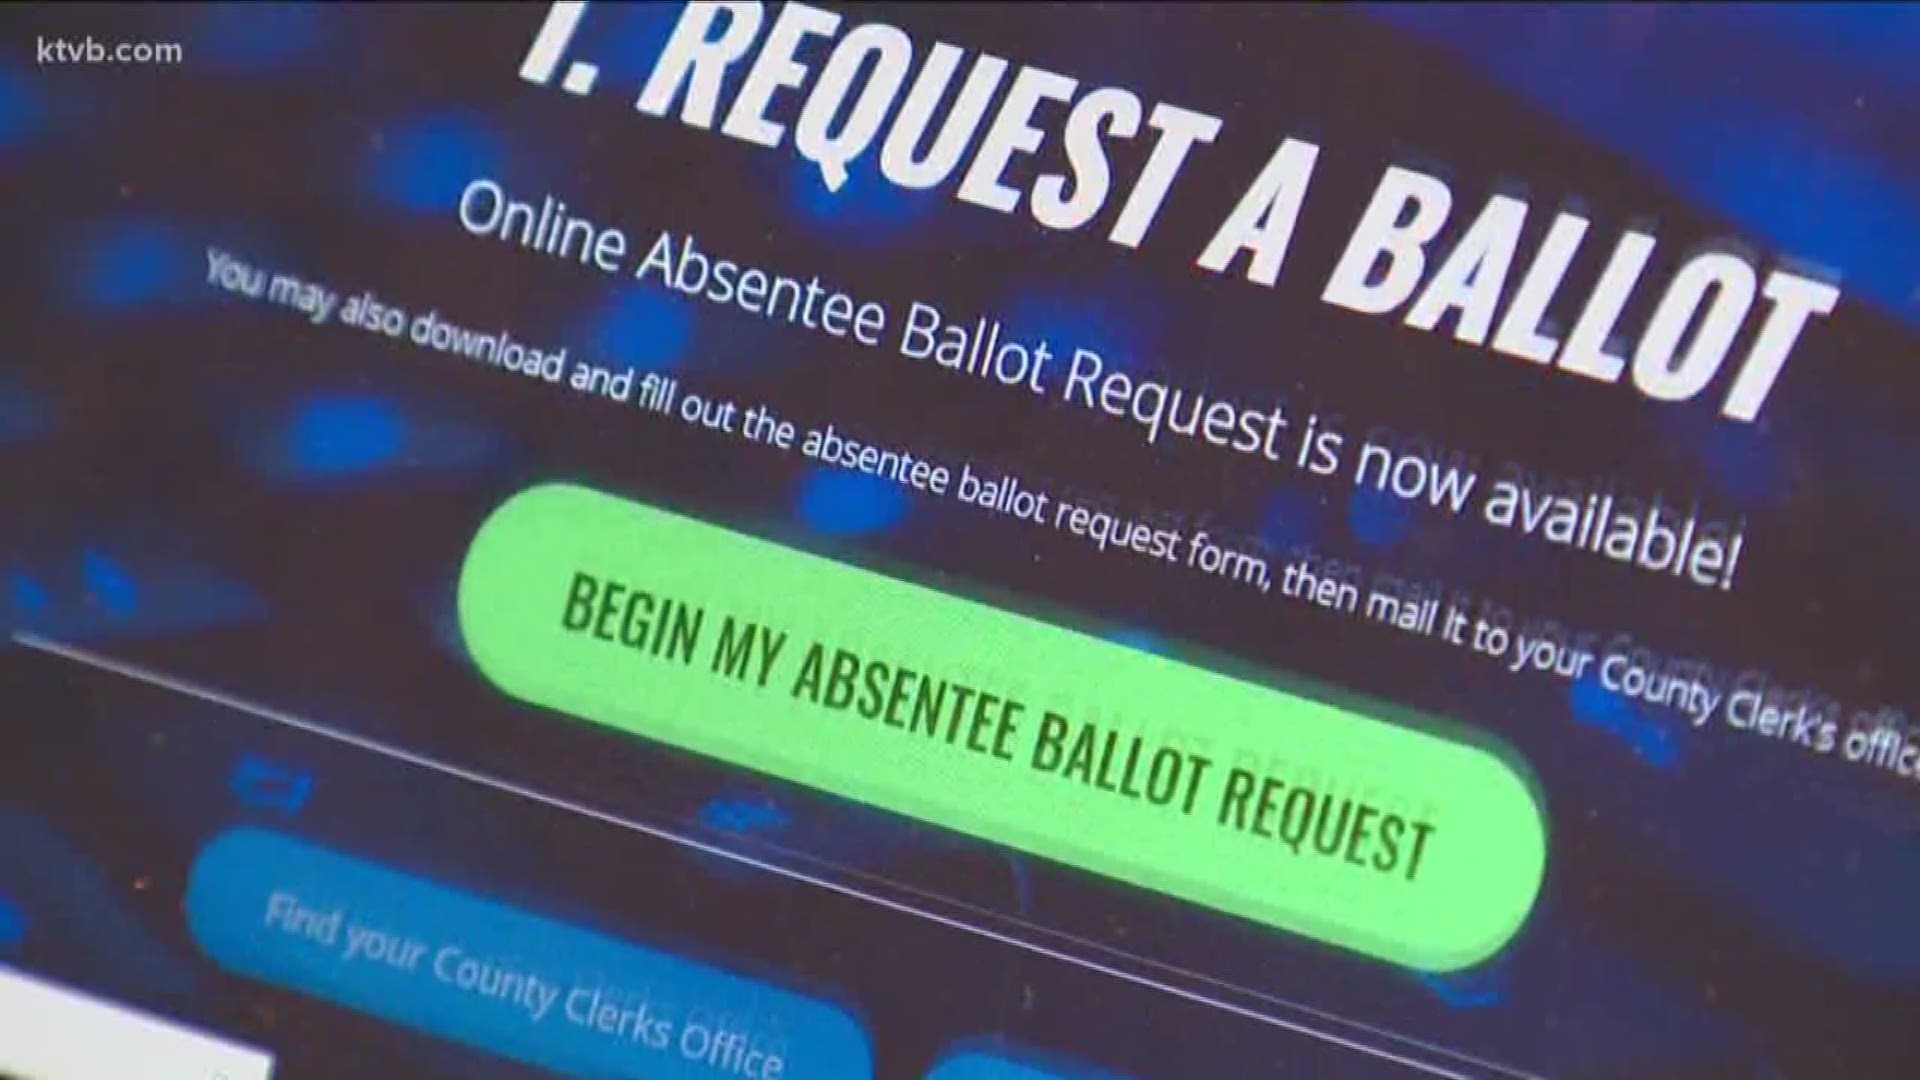 "I urge all voting Idahoans to request their absentee ballots as soon as possible so they can vote from home this year," Gov. Little said.